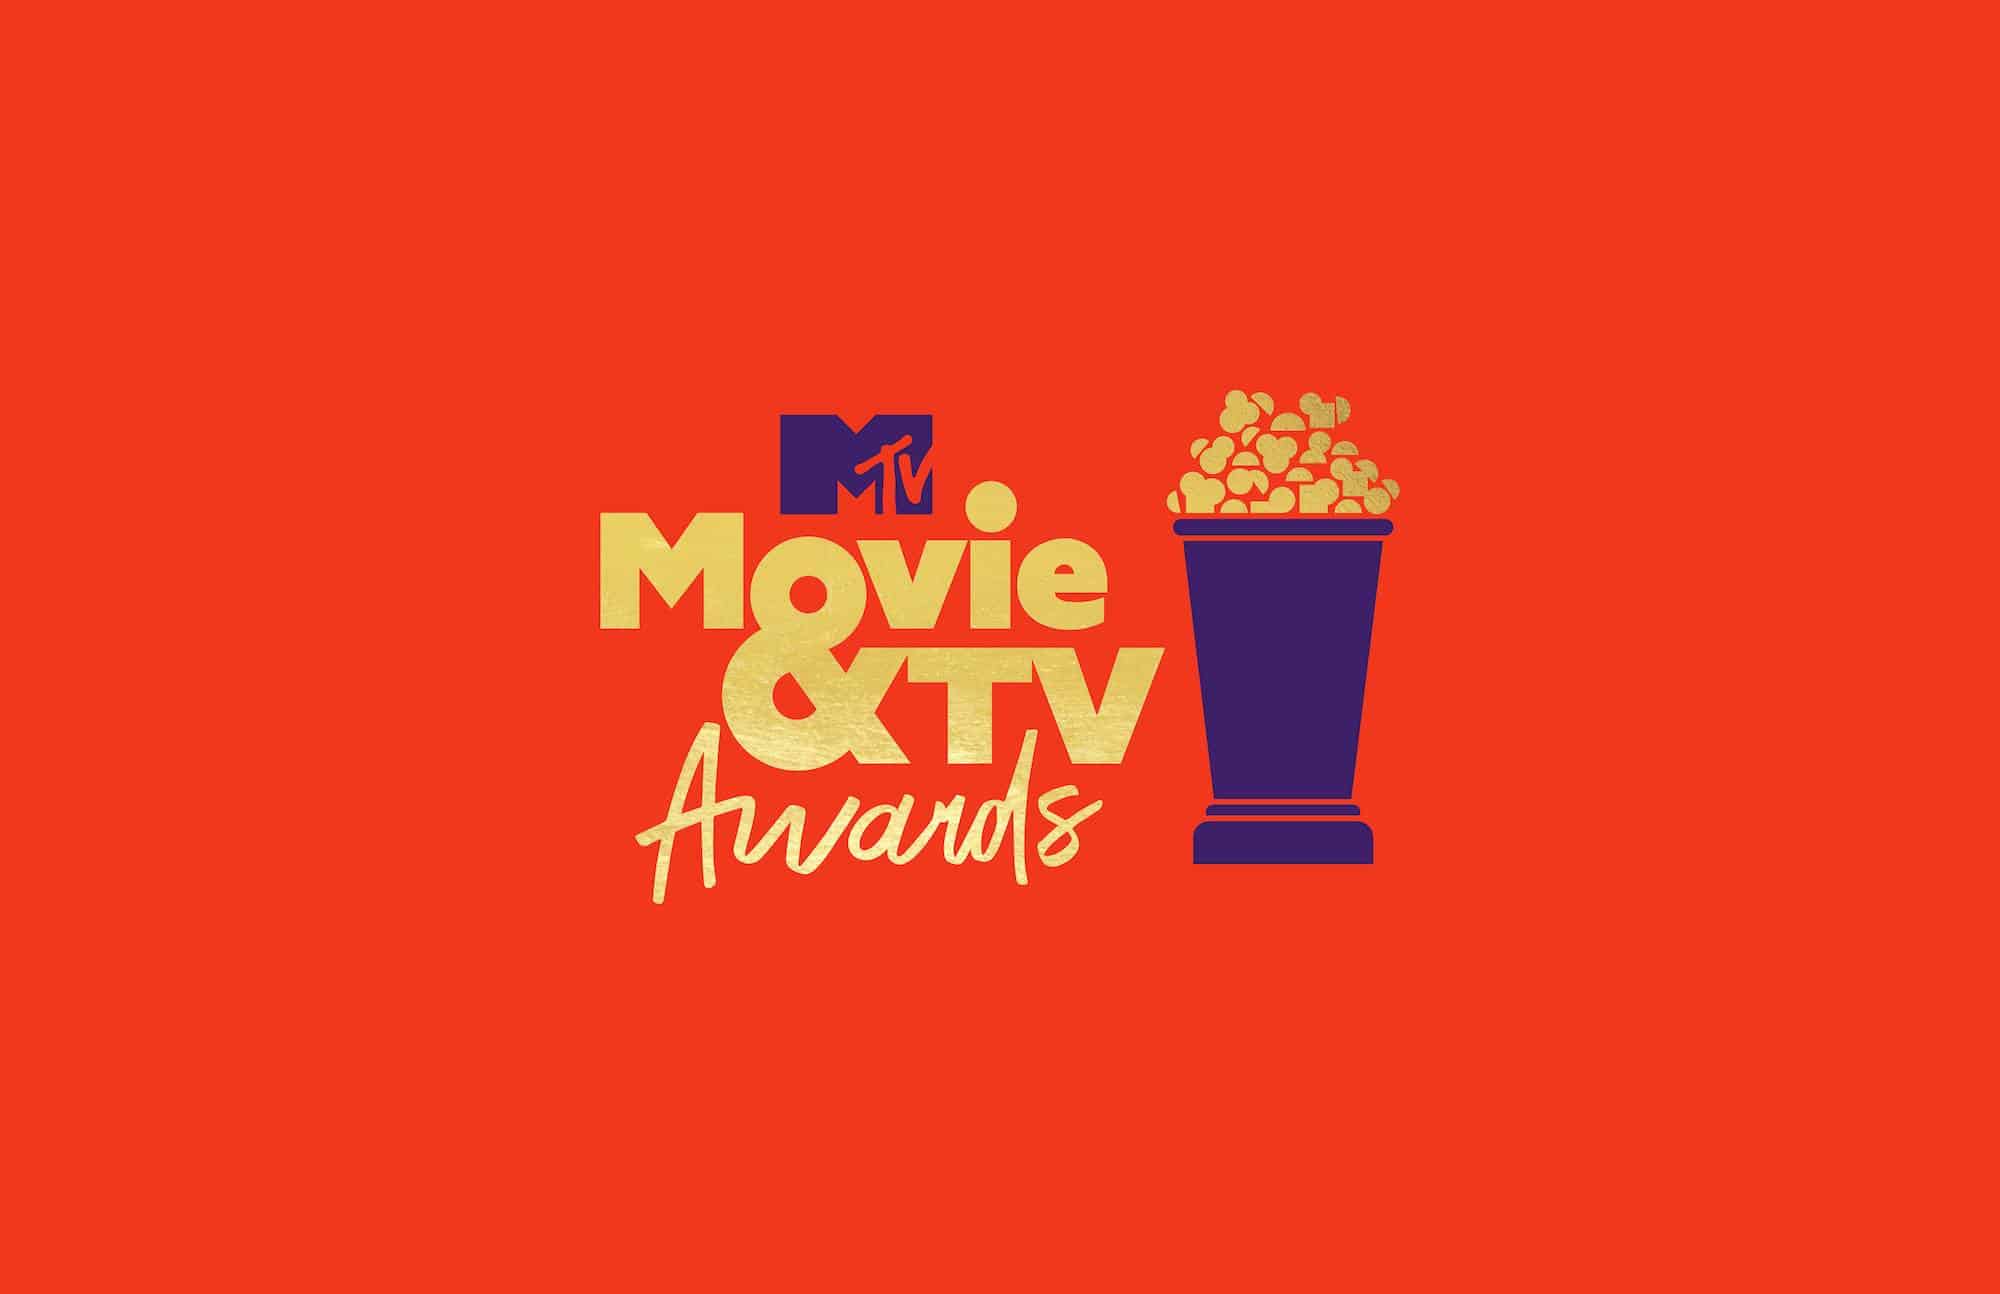 MTV Movie & TV Awards logo in this image from MTV.